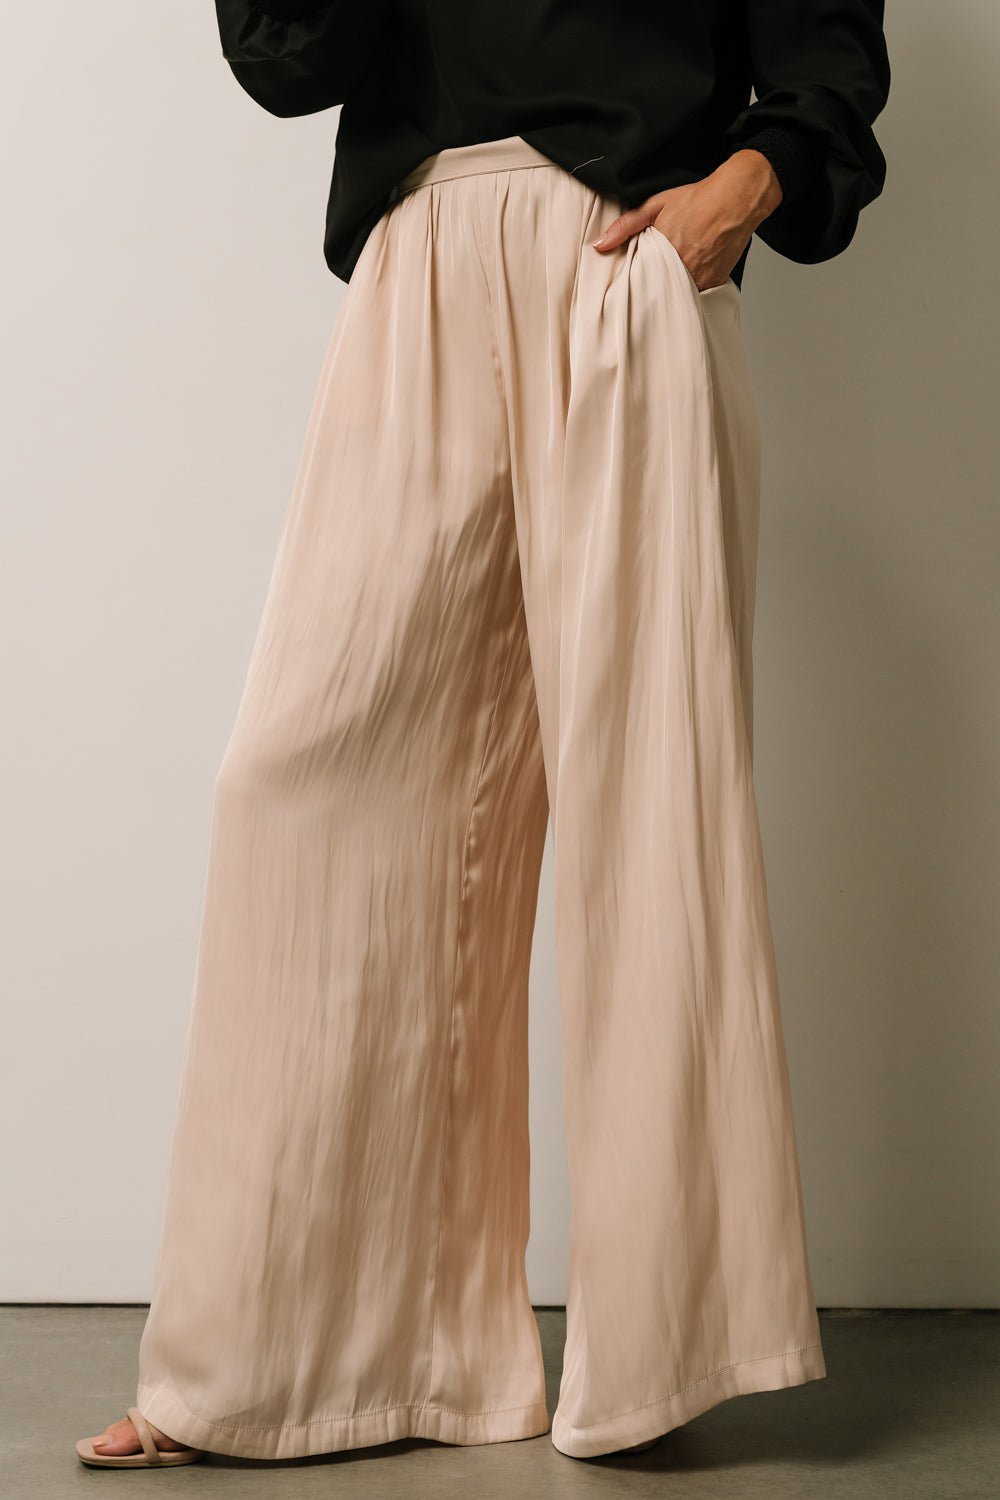 Champagne flat-front stretch year-round Wide leg Pants